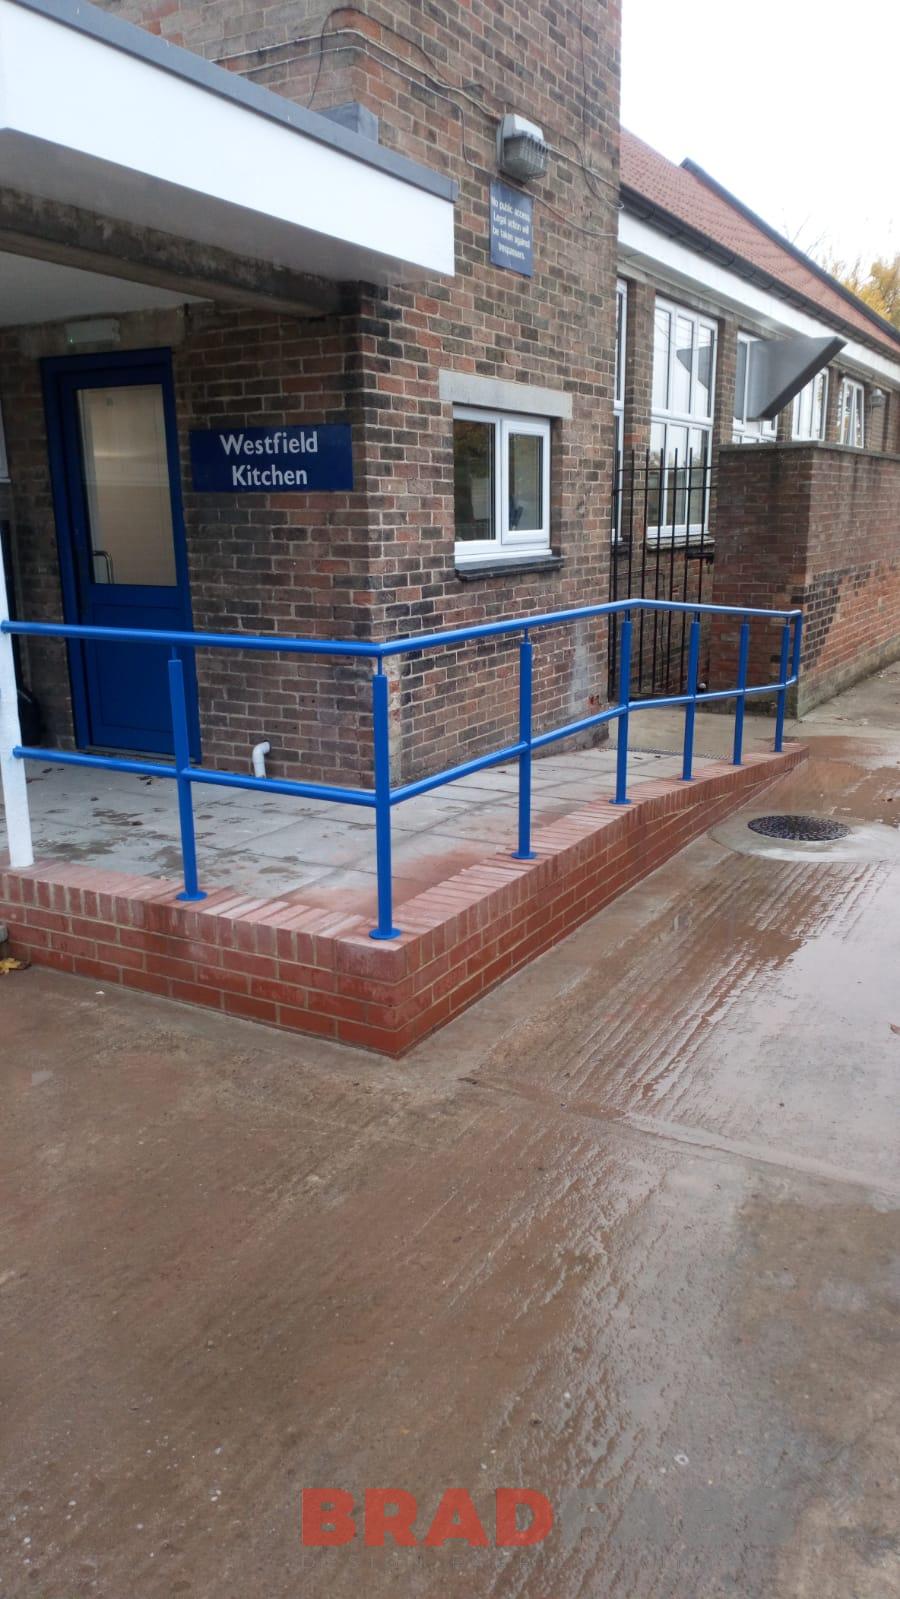 Railings manufacture, installed and designed by Bradfabs